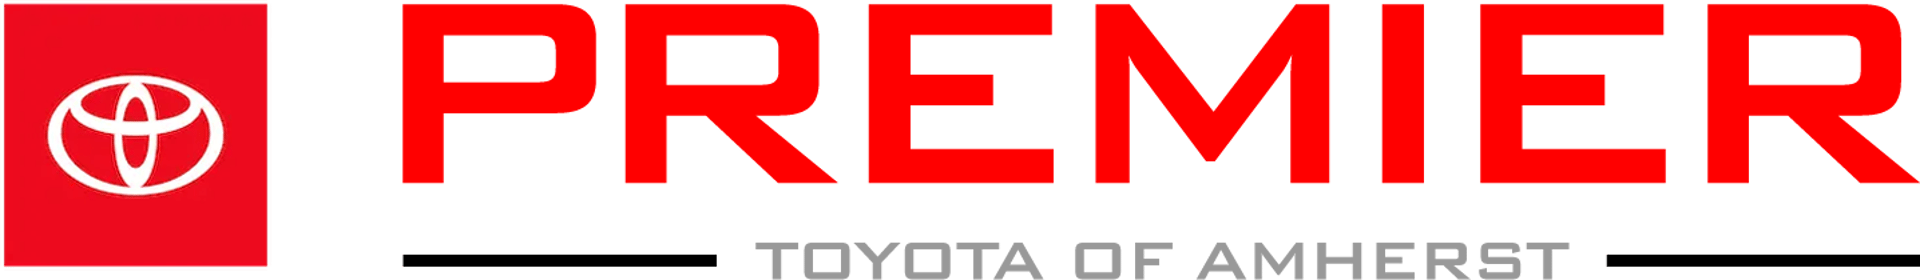 Premier Toyota of Amherst